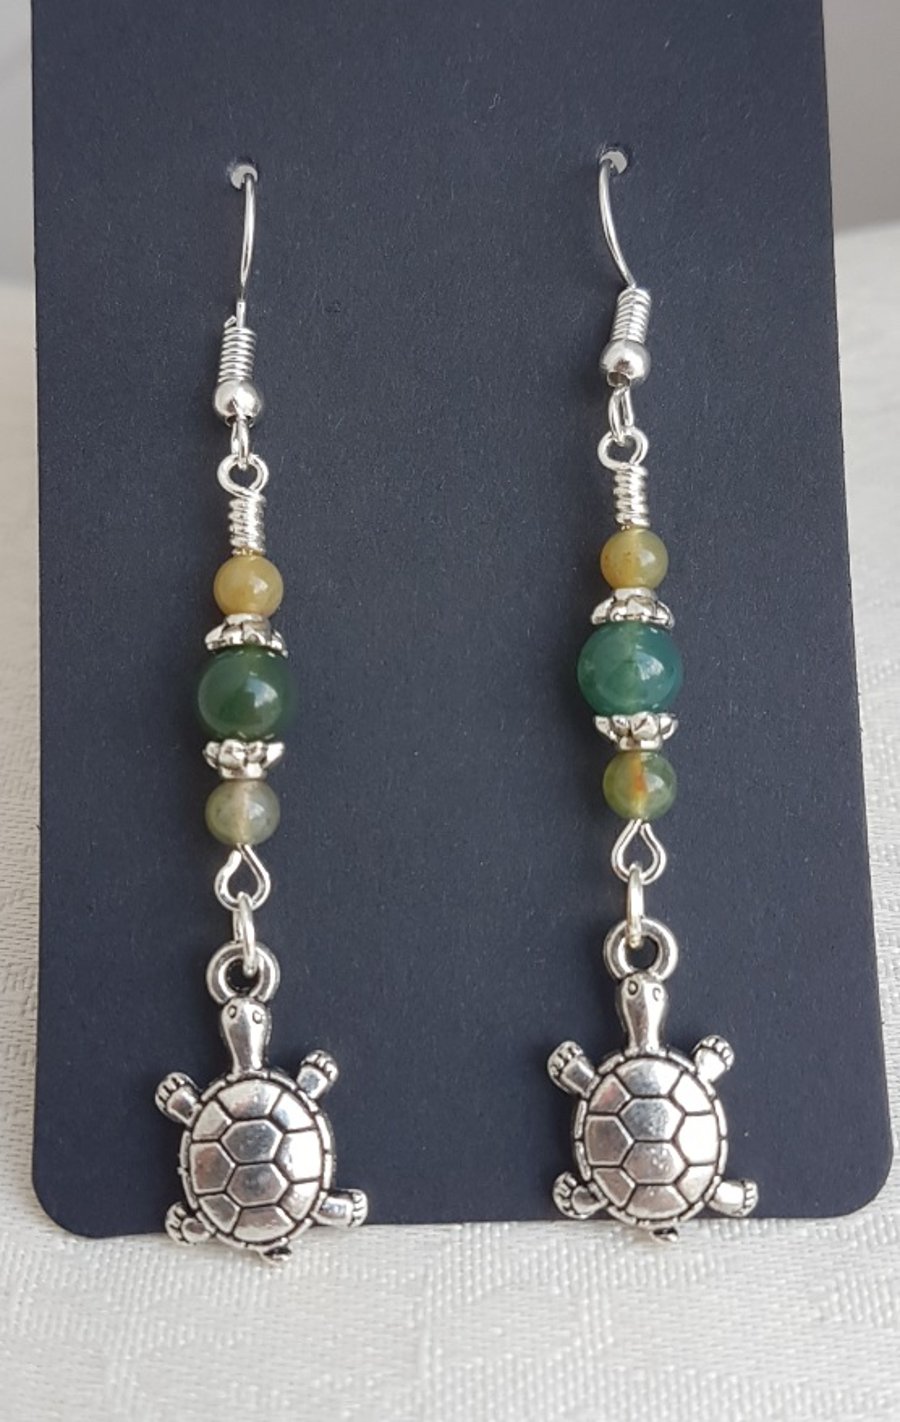 Gorgeous Dangly Tortoise Charm and Gemstone Earrings.